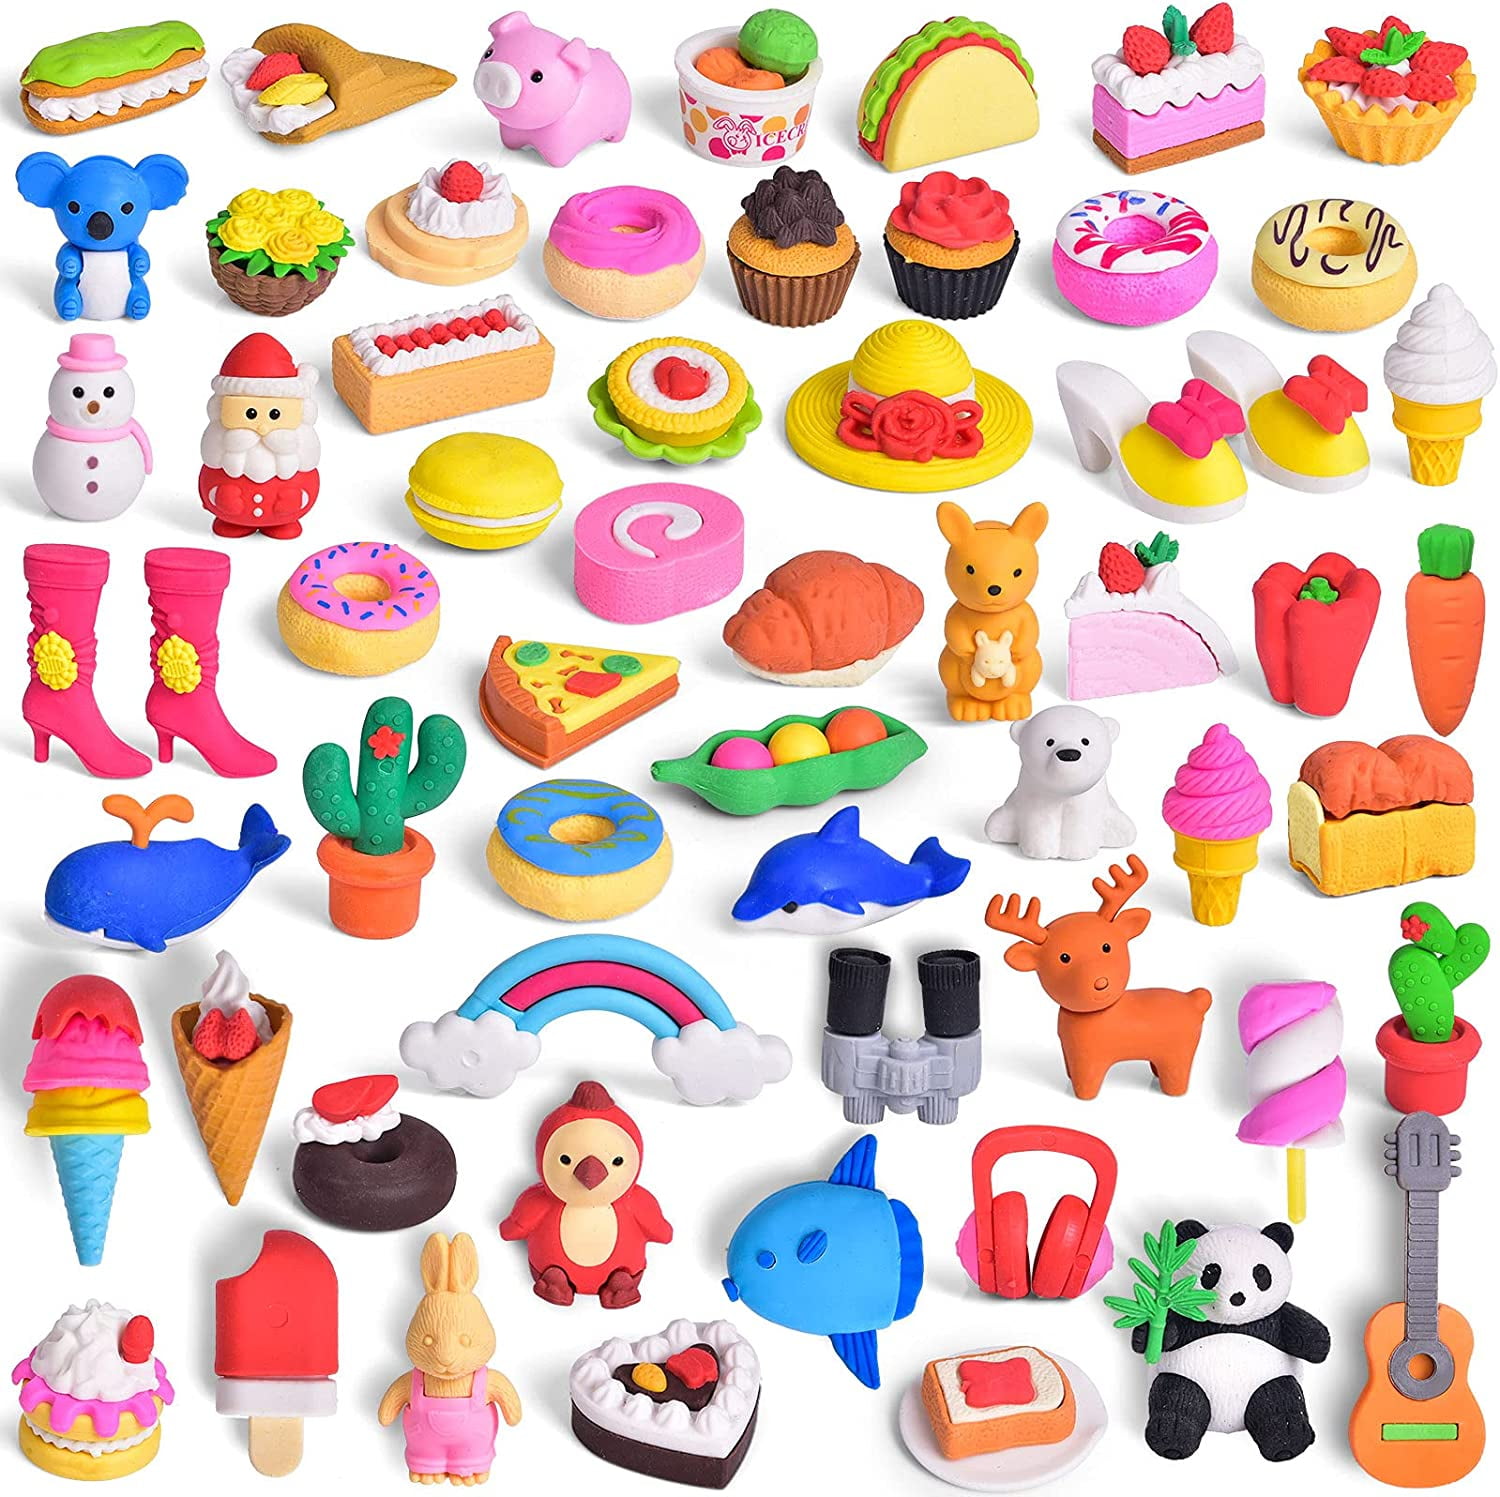 50PCS Cute Erasers Toys Students Rainbow Color Pencil Eraser for Stationery Gift 